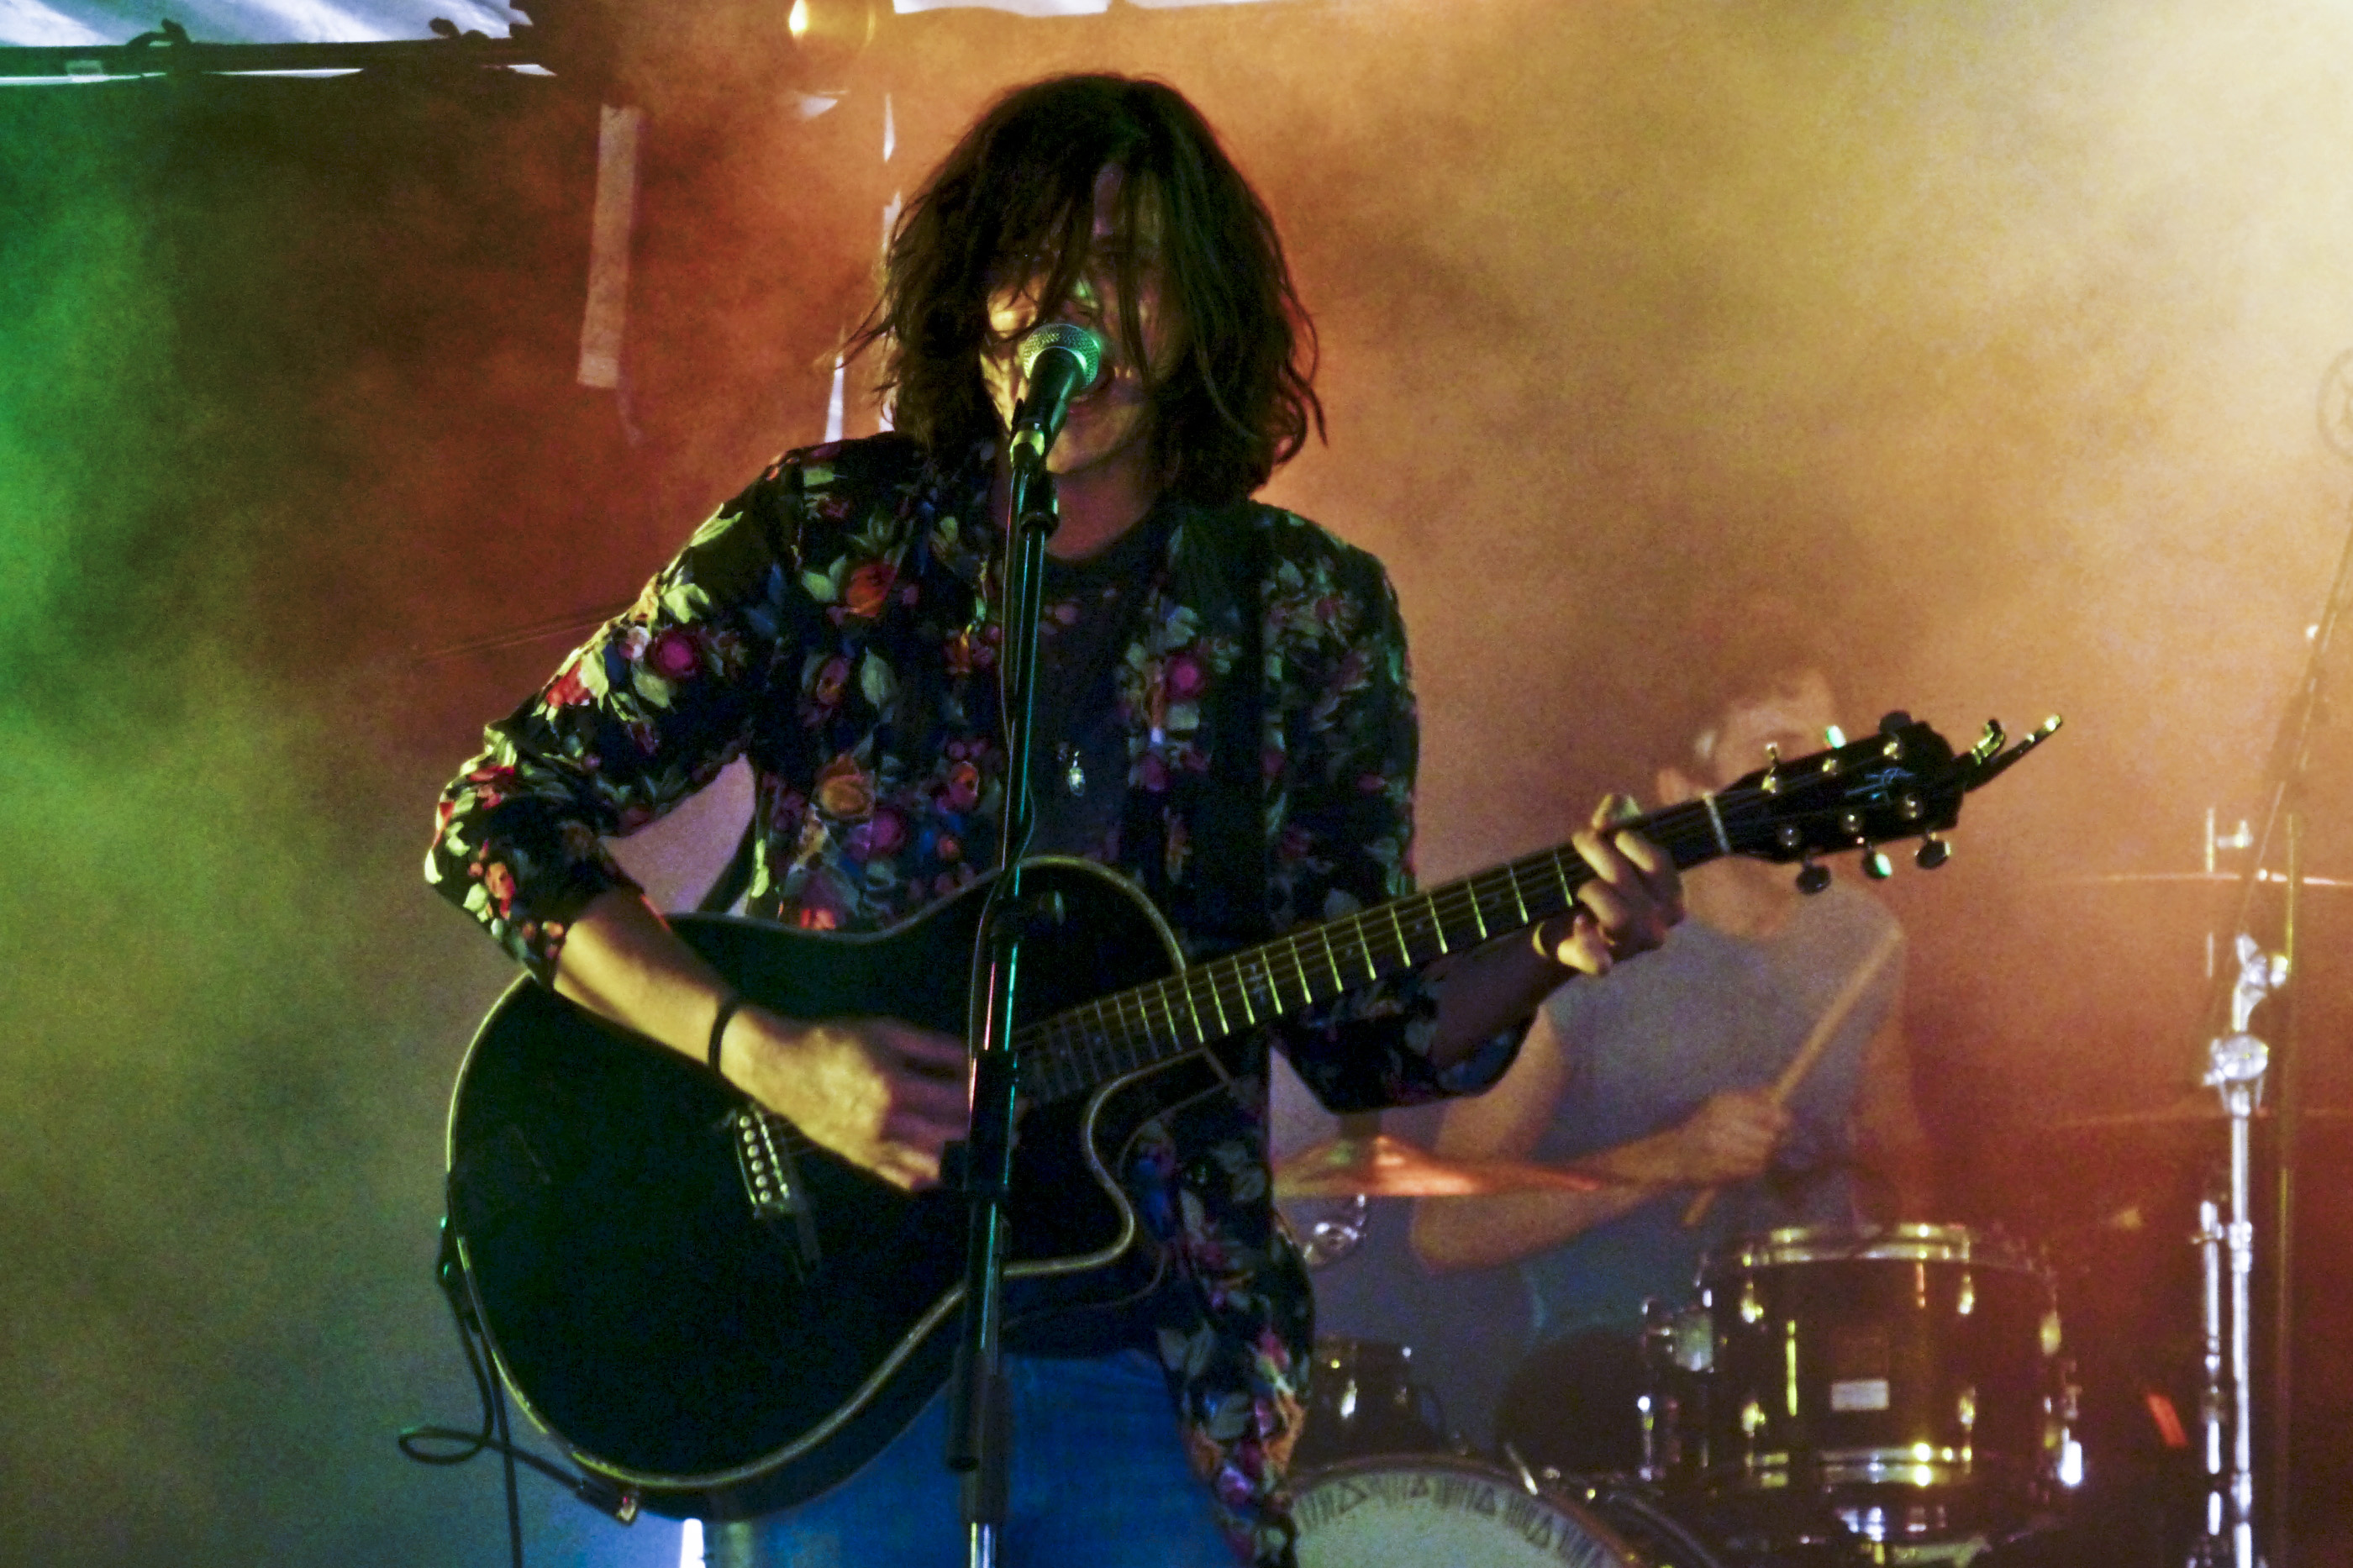 Christian Zucconi of GROUPLOVE performing at Leeds Festival in 2011 | photo courtesy of photopin